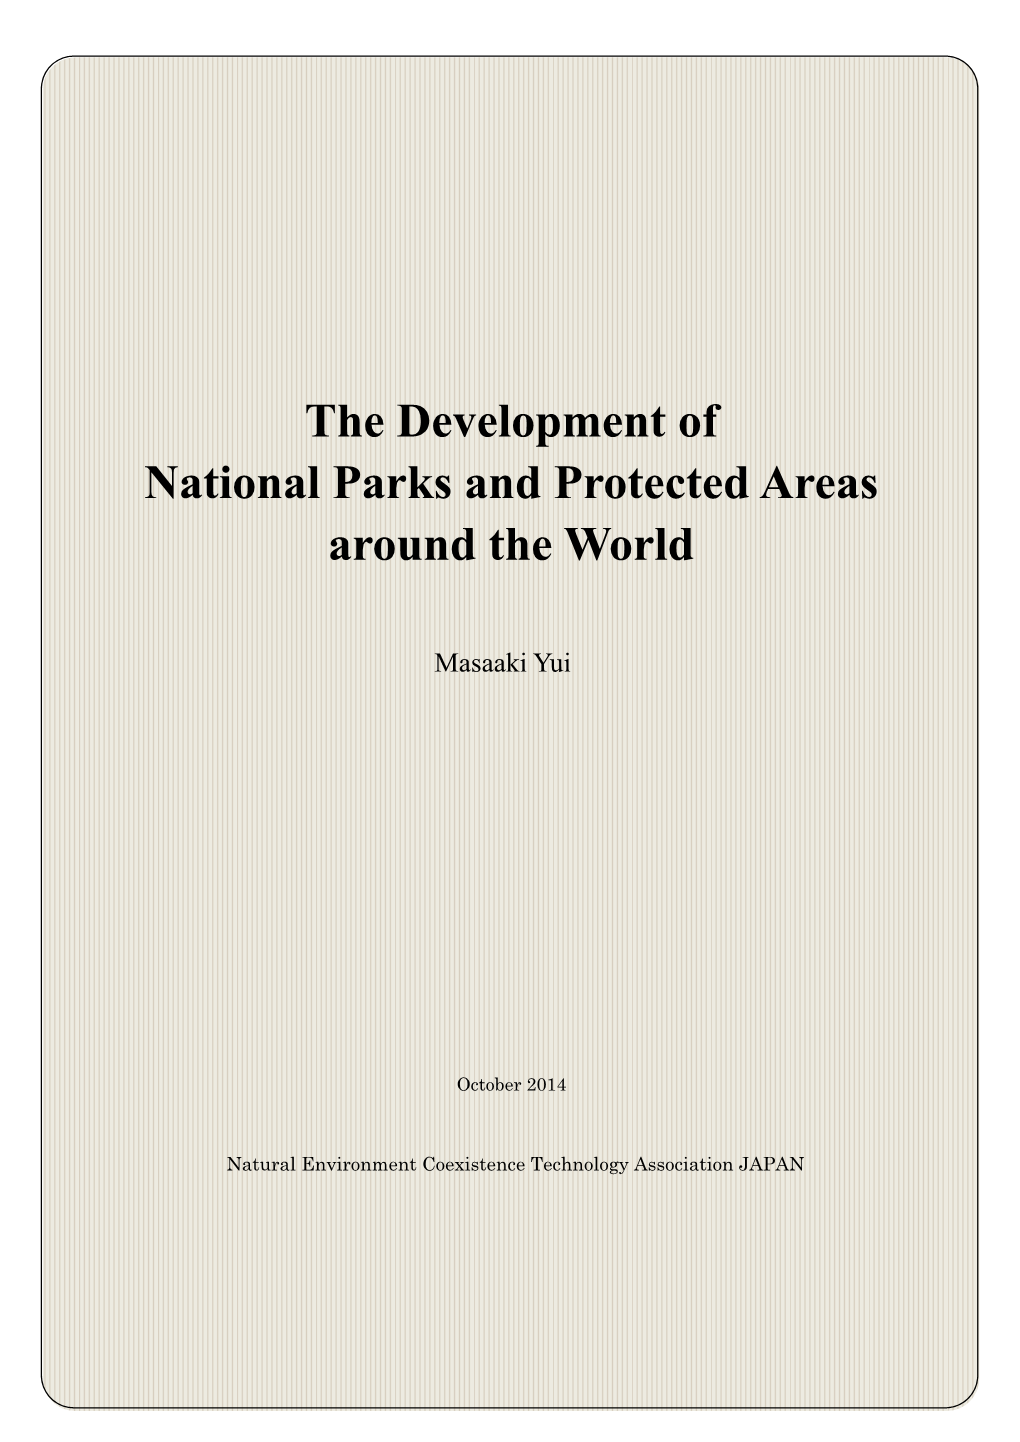 The Development of National Parks and Protected Areas Around the World